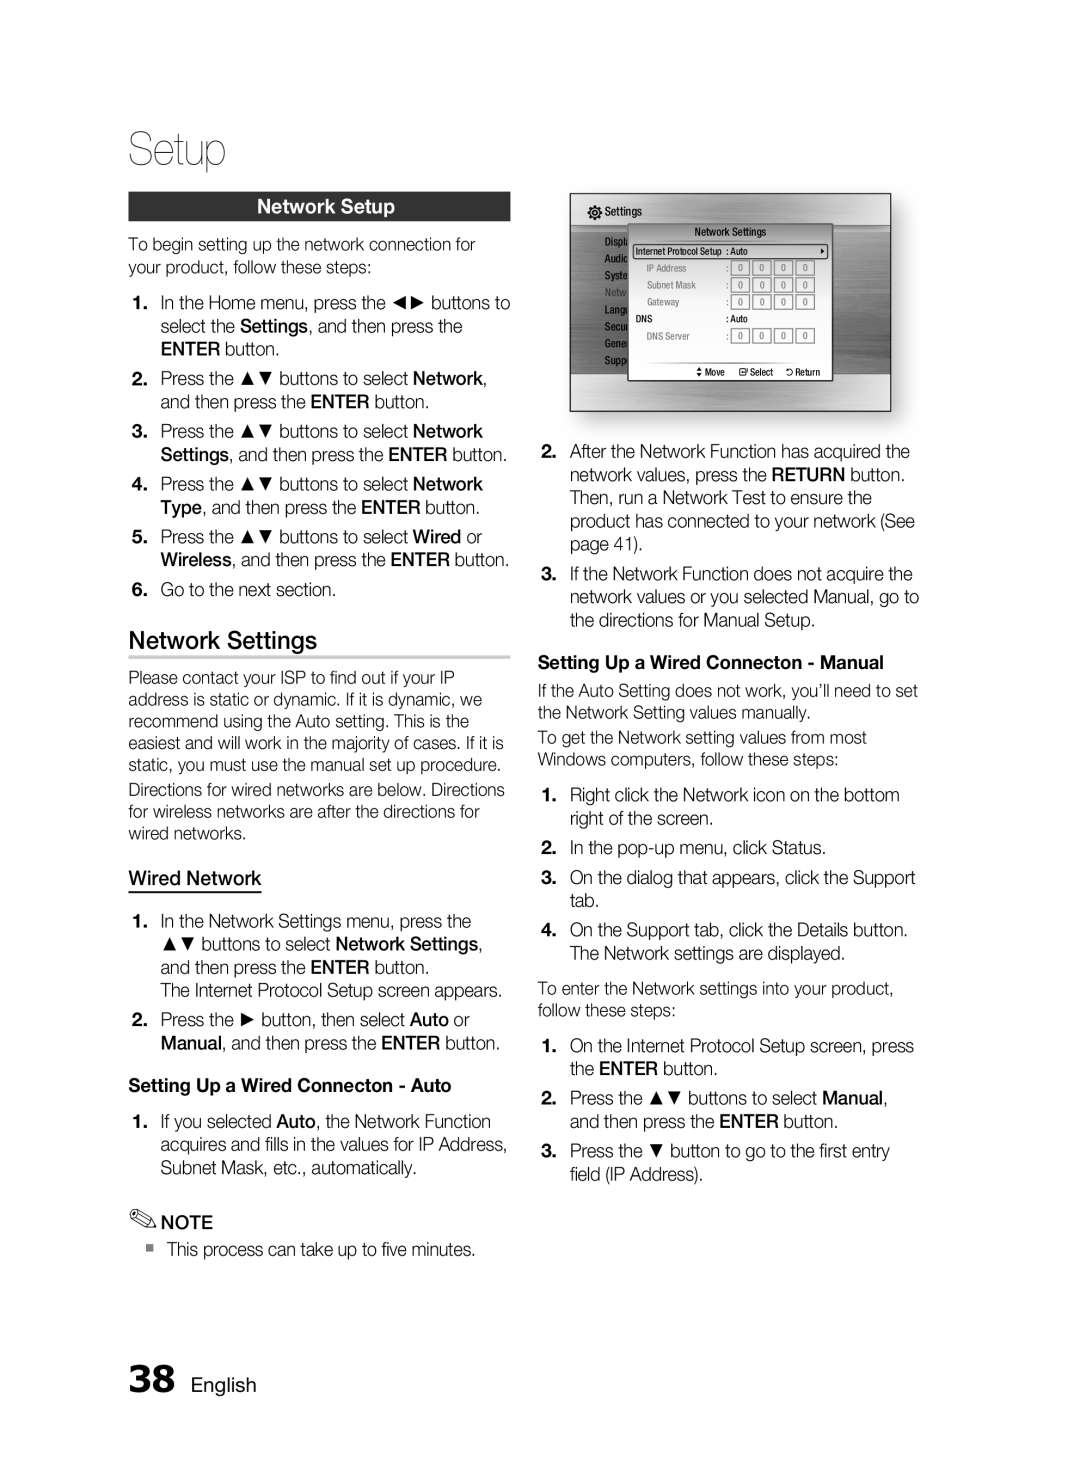 Samsung HT-C5550 user manual Network Settings, Network Setup, Wired Network 